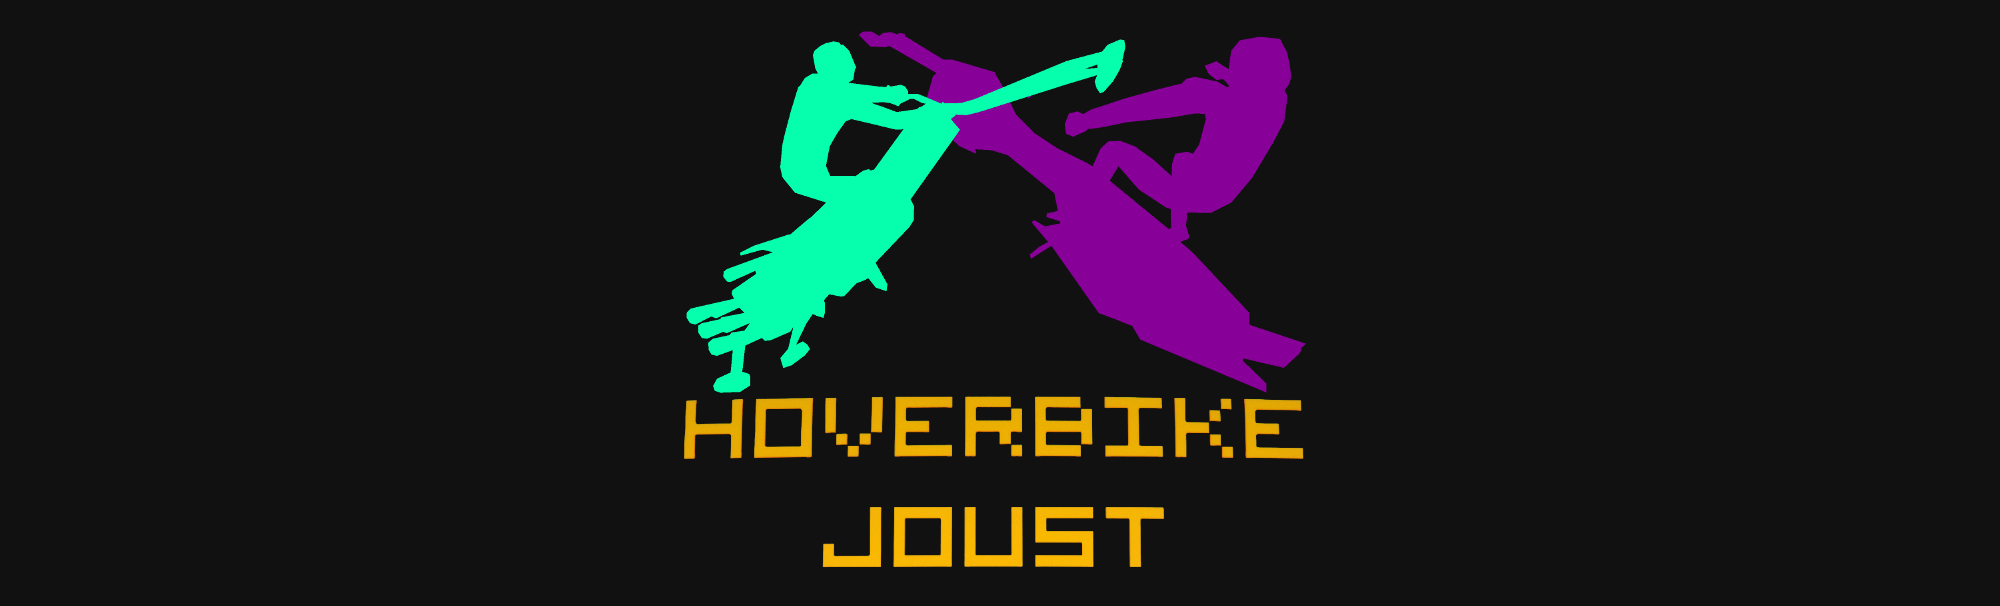 Hoverbike Joust